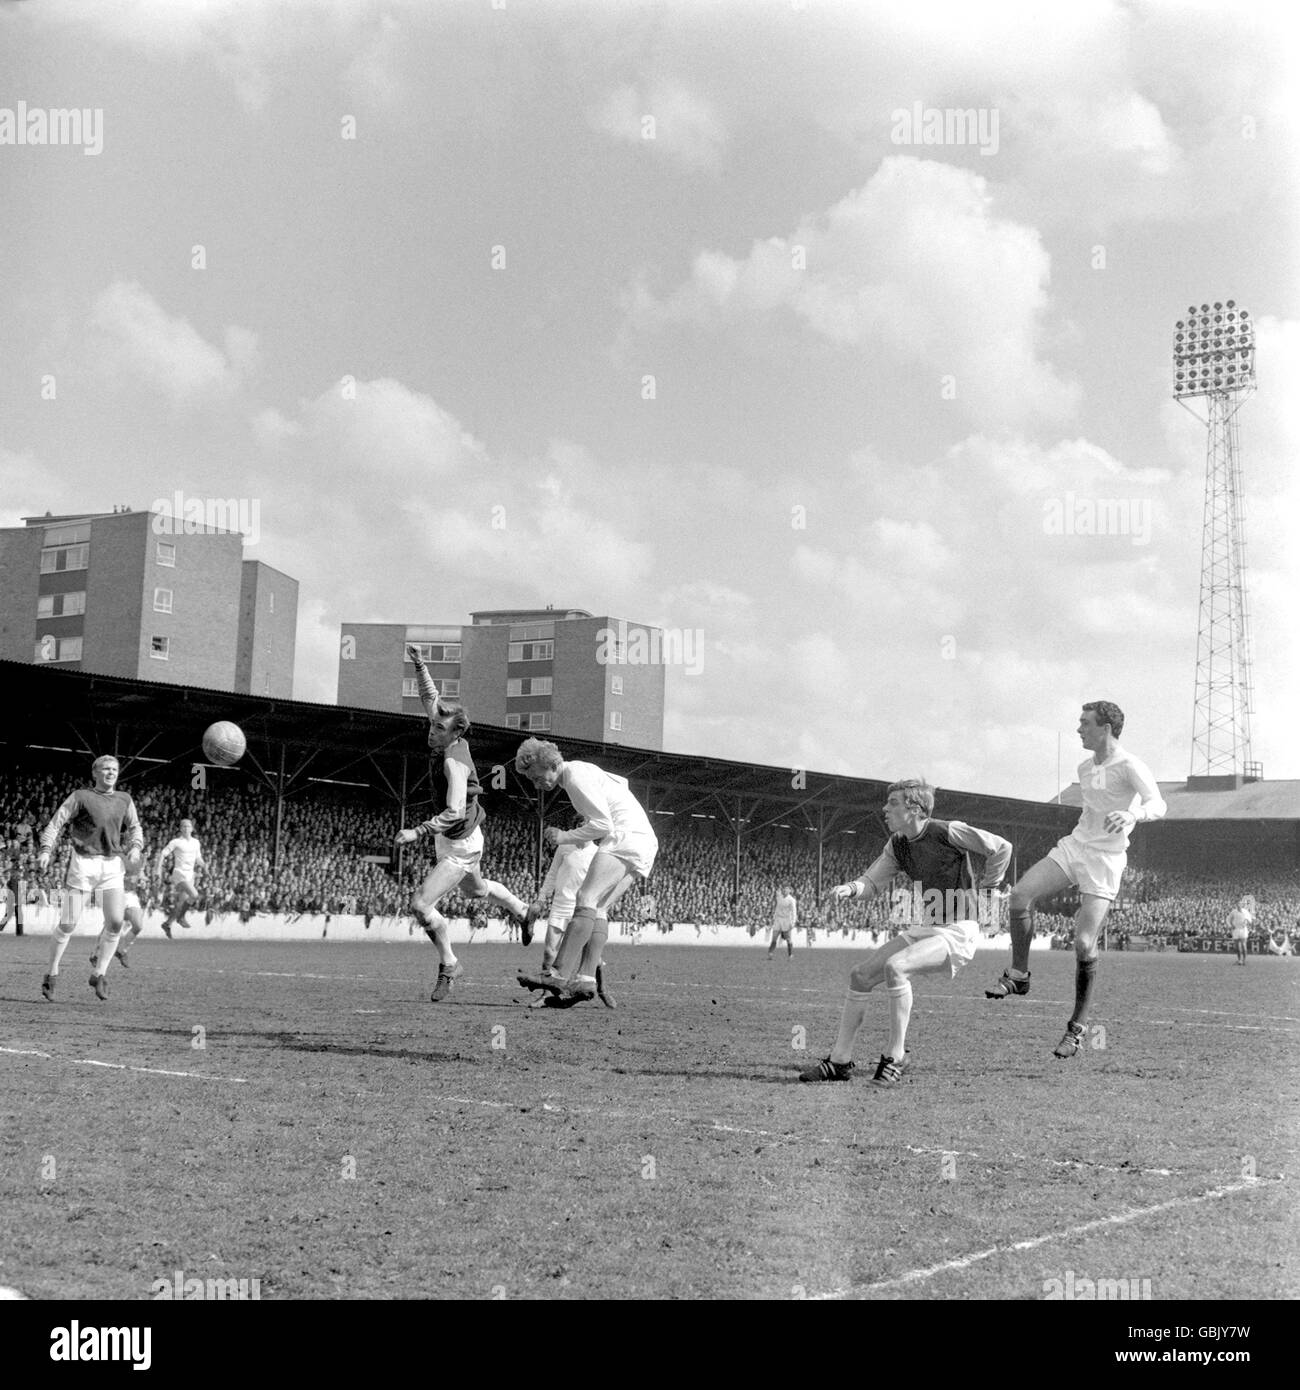 Football - Football League Division One - West Ham United v Manchester United - Upton Park - 1967 Banque D'Images